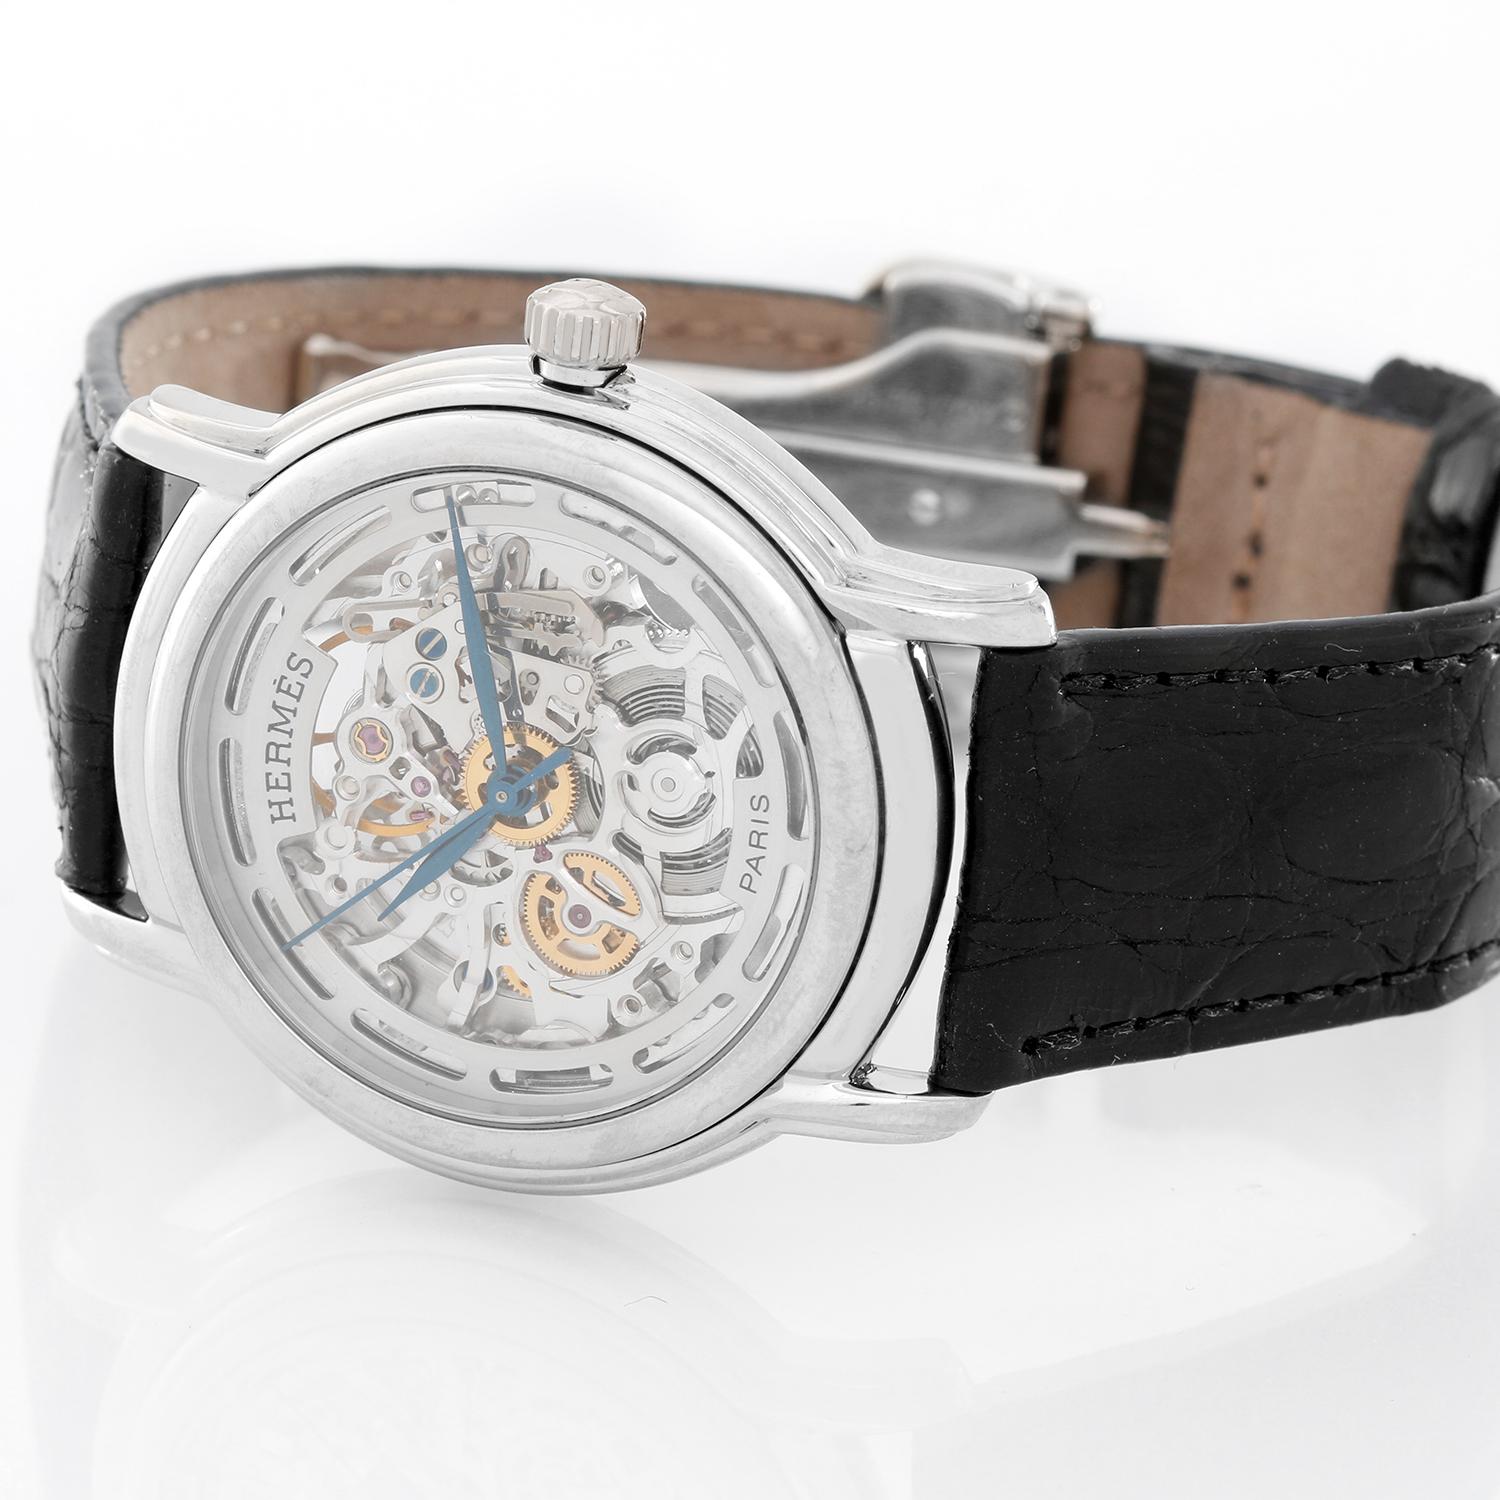 Hermes Sesame Skeleton 18K White Gold Watch  - Automatic winding . 18K White Gold ( 36 mm ) . Skeleton dial with blue steeled hands . Black leather strap with Hermes 18K White Gold deployant buckle . Pre-owned with custom box .